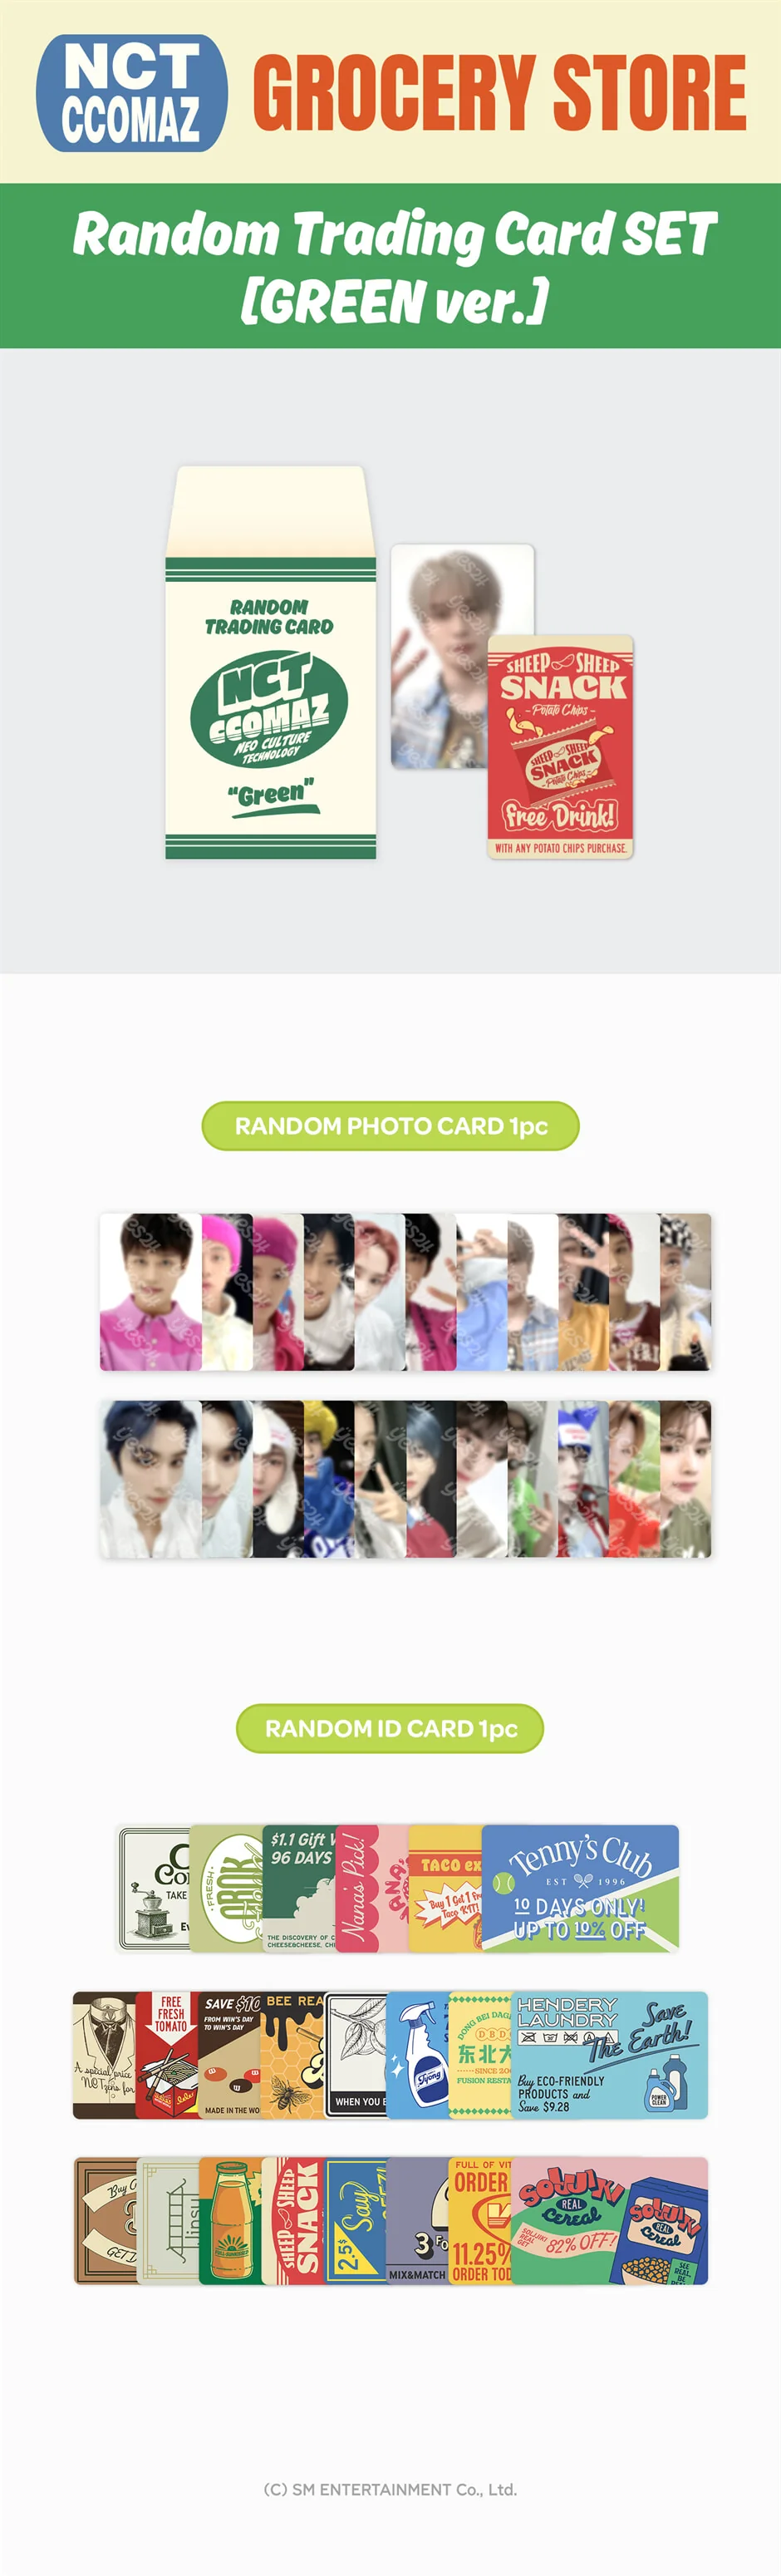 NCT CCOMAZ Grocery Store Trading Card Pack